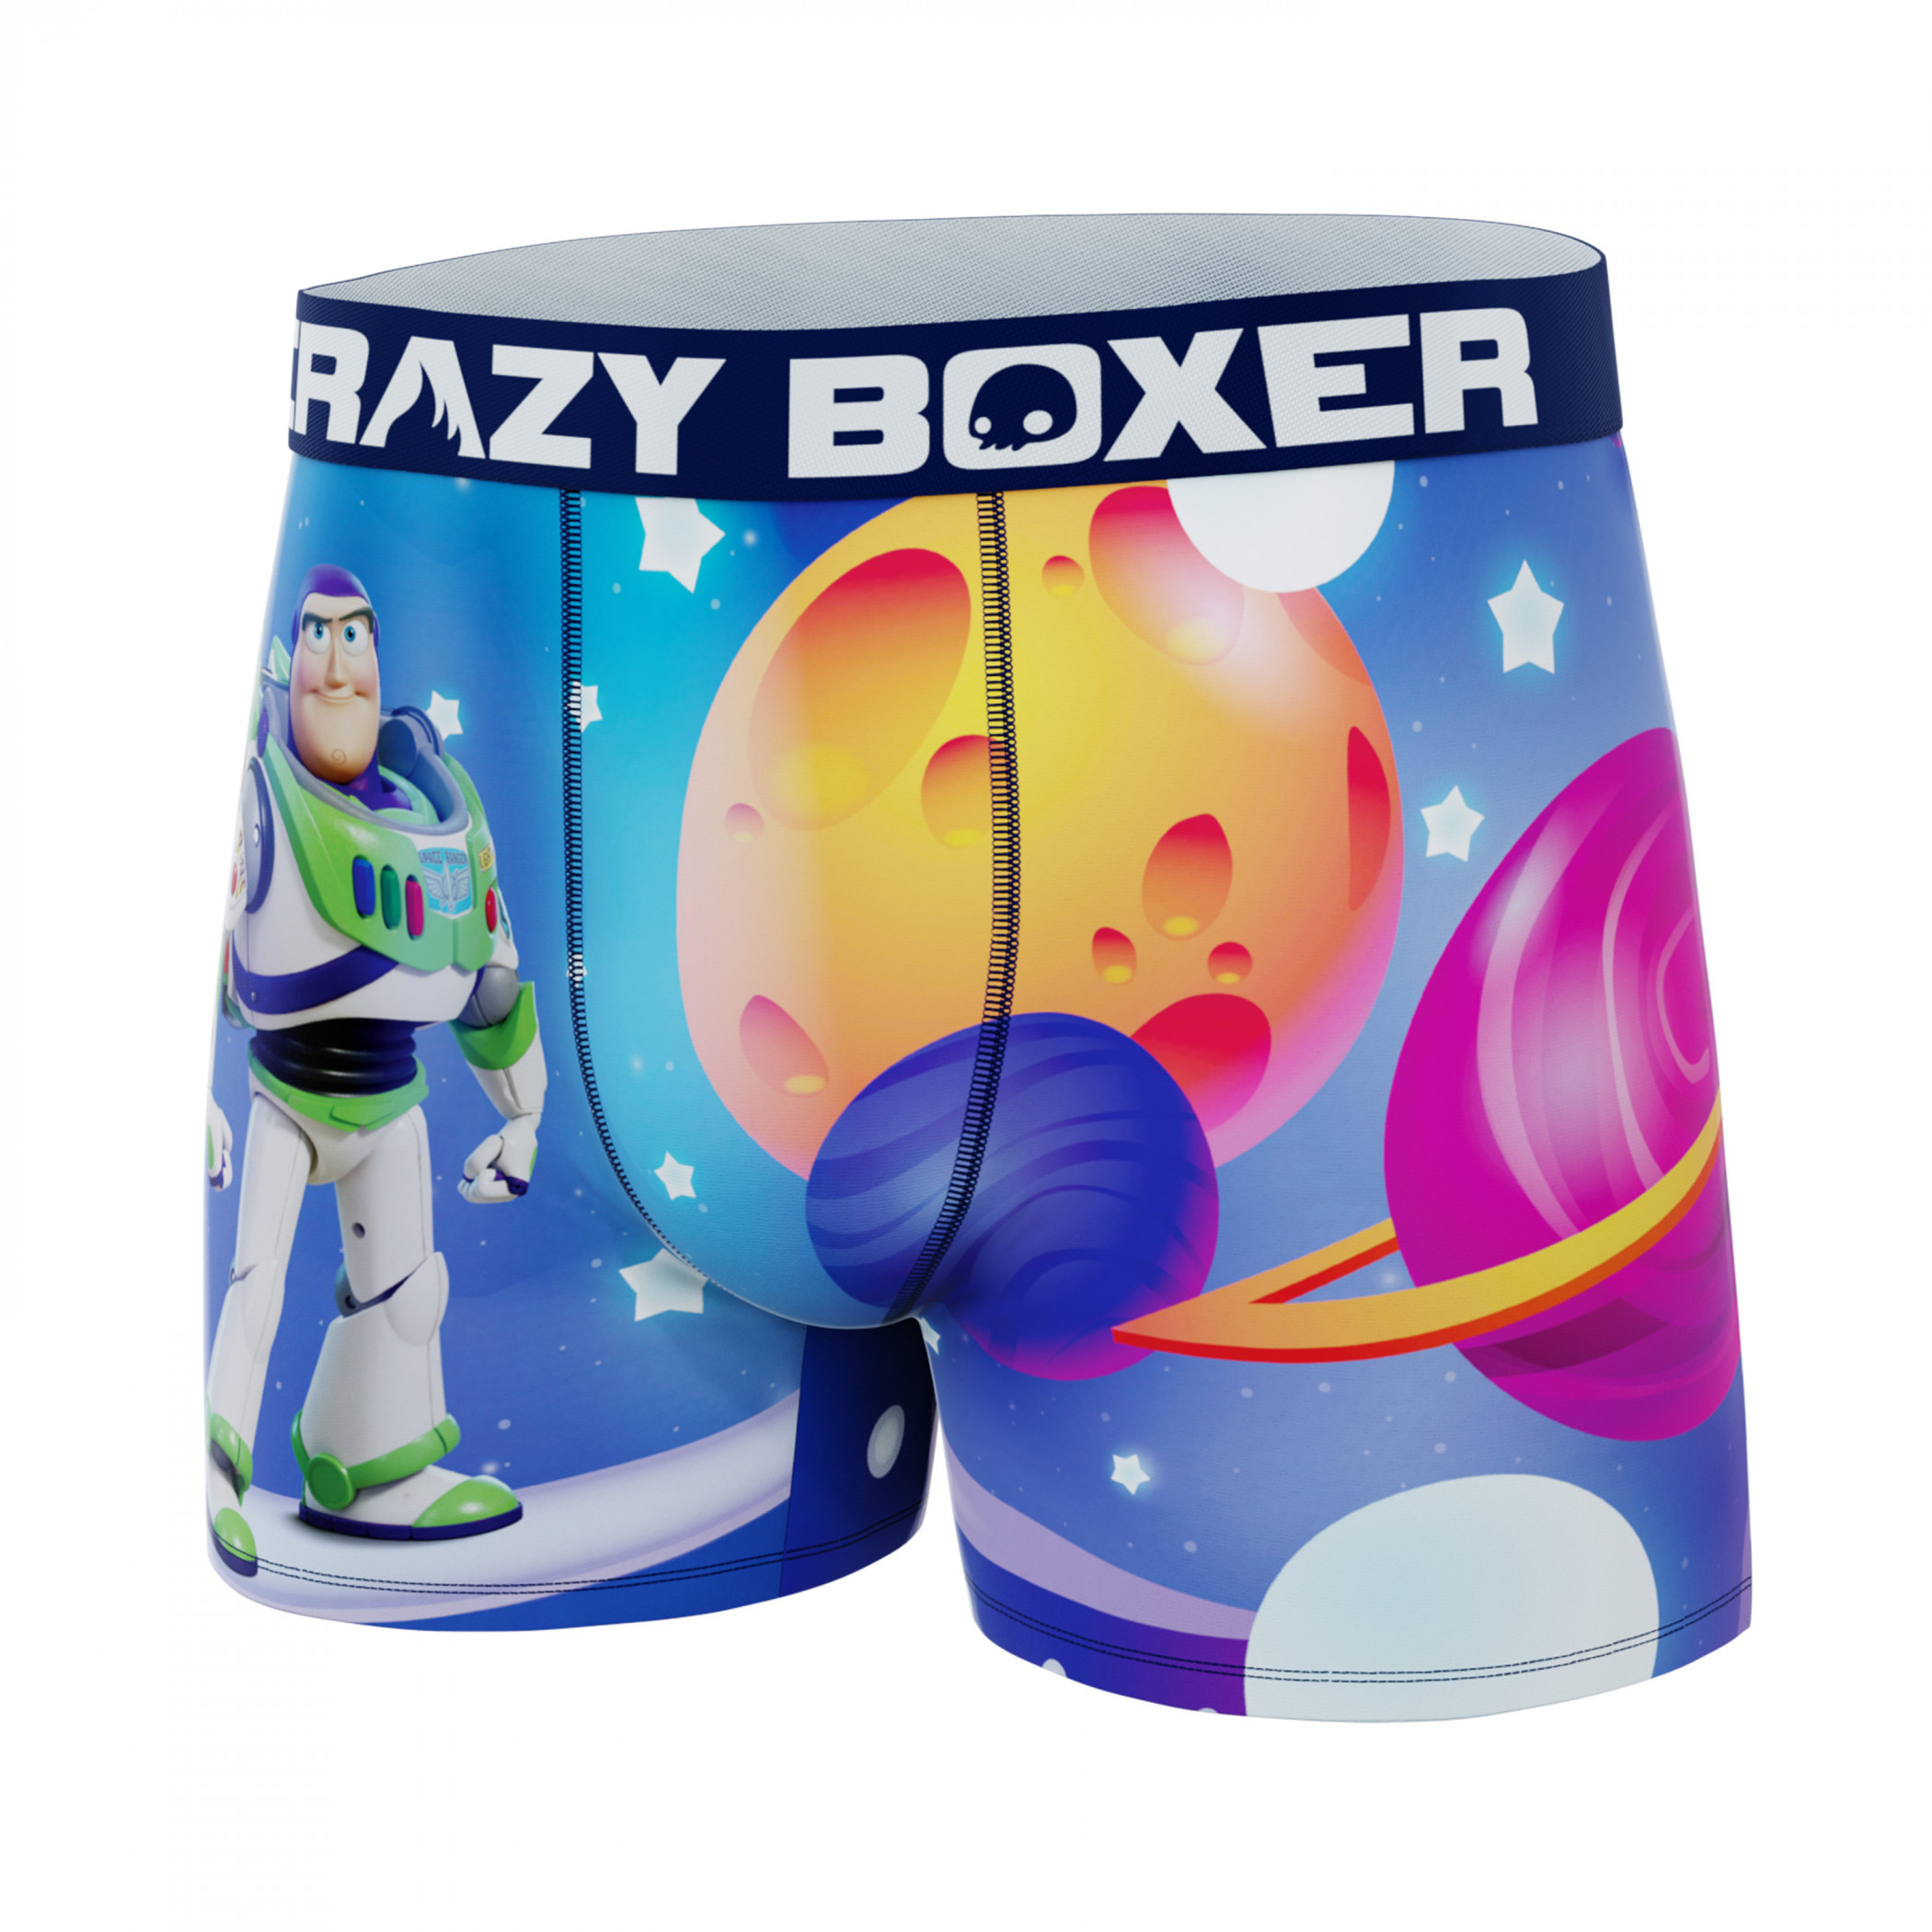 Toy Story Boys Underwear Briefs for Kids Features Woody and Buzz Lightyear  Size 4